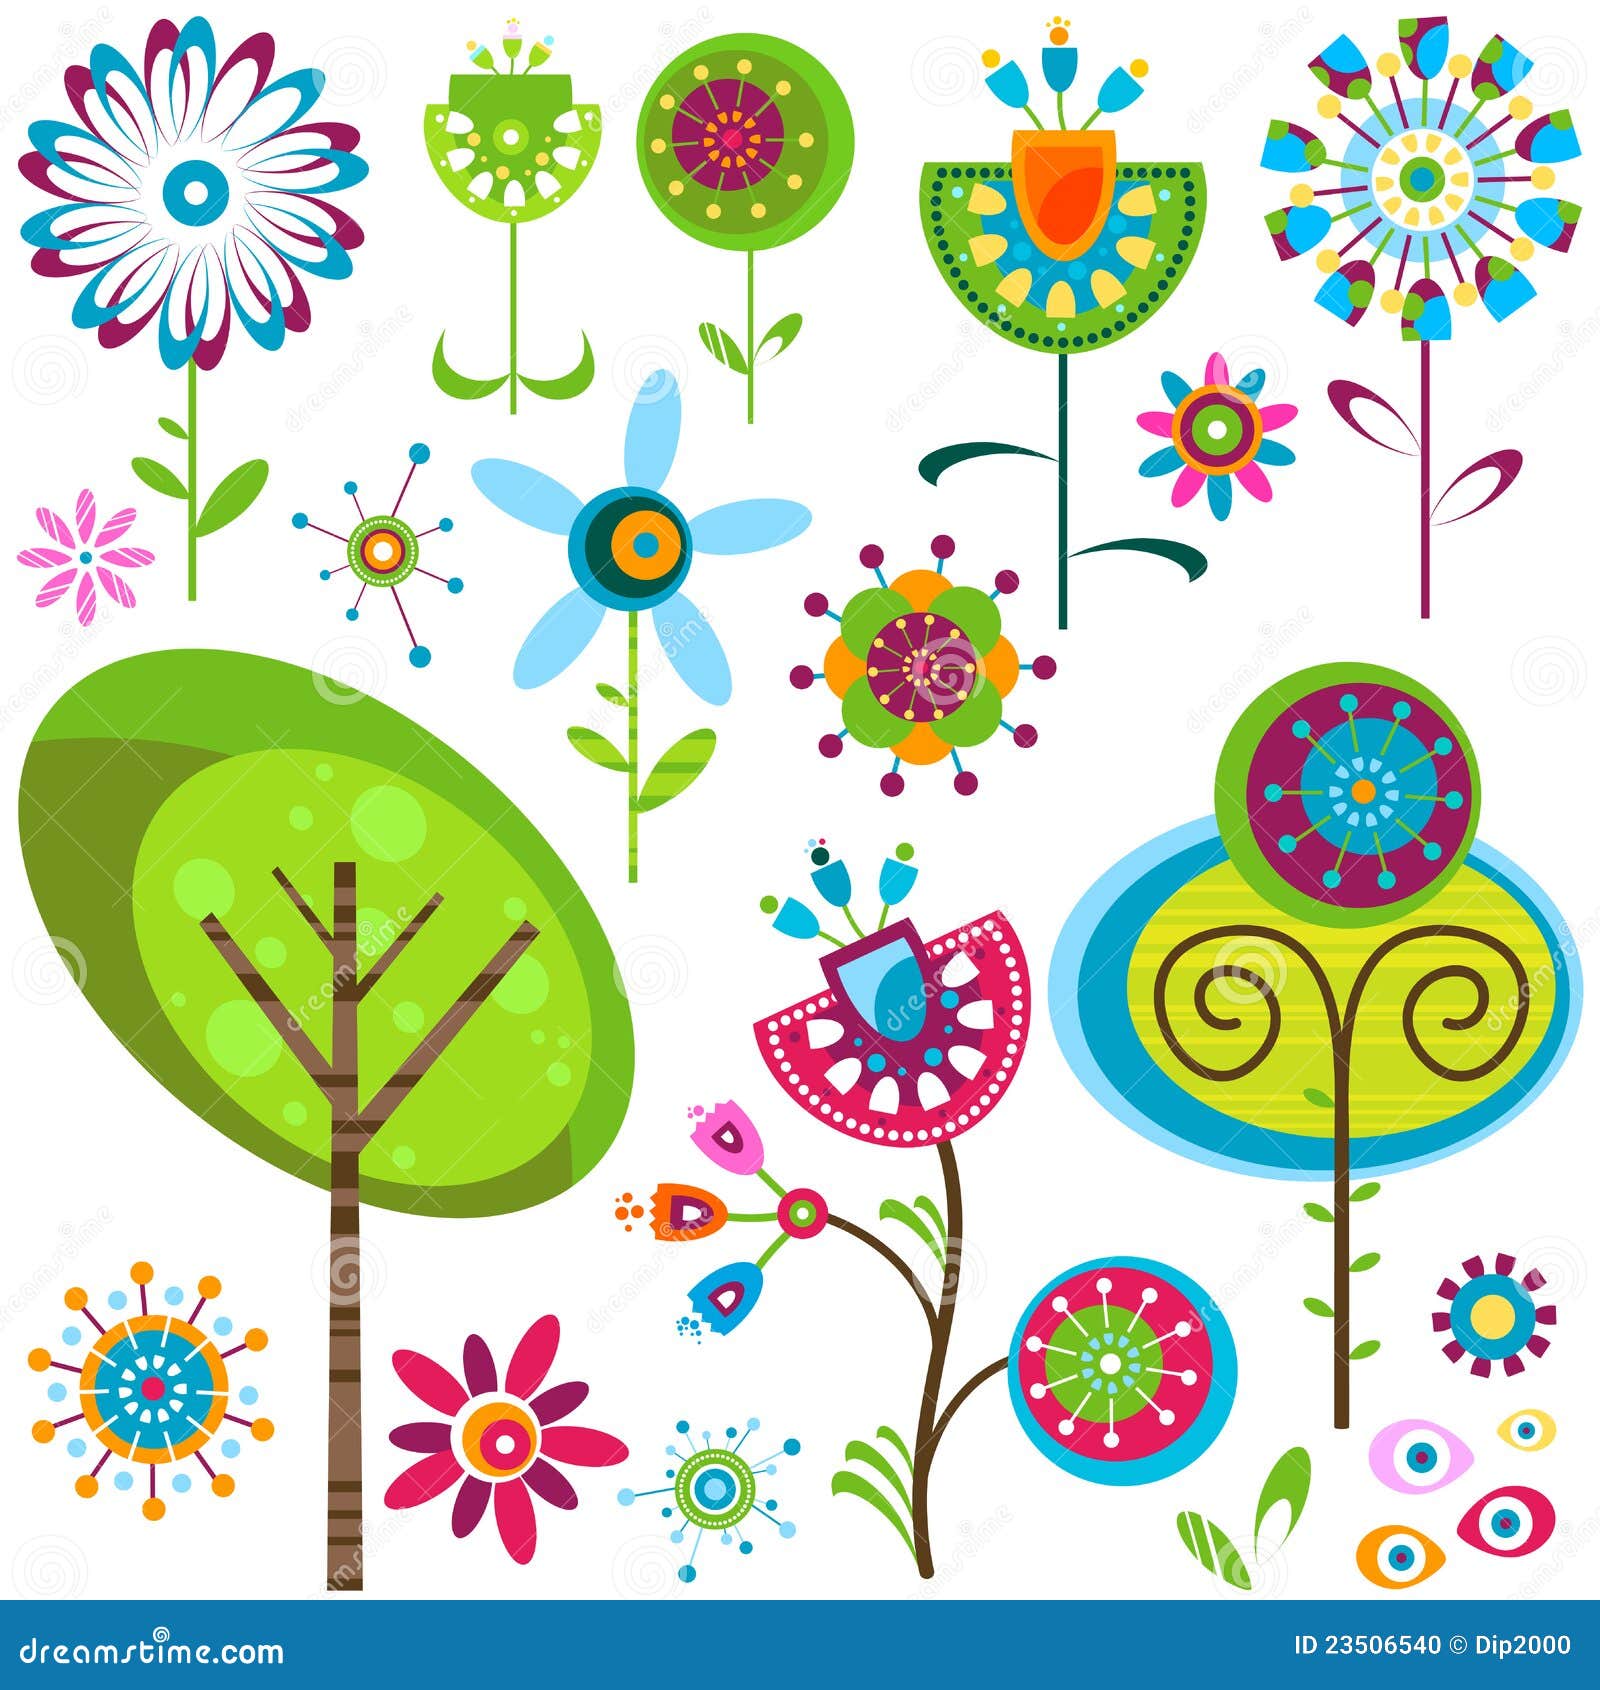 Whimsy flowers stock vector. Illustration of abstract - 23506540